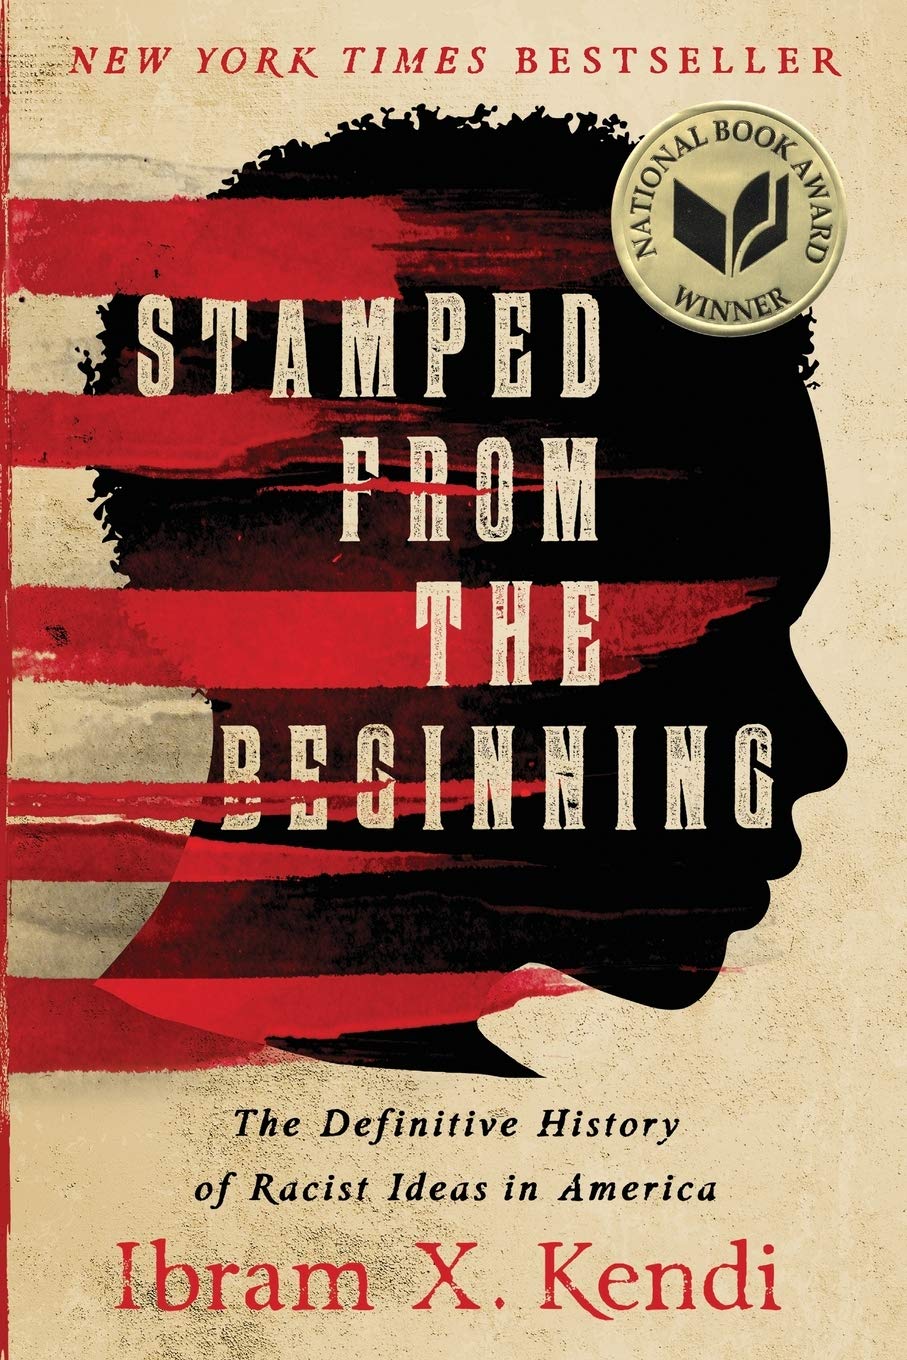 Image of the cover of Stamped from the Beginning: The Definitive History of Racist Ideas in America (Nation Books, 2016) by Ibram X. Kendi